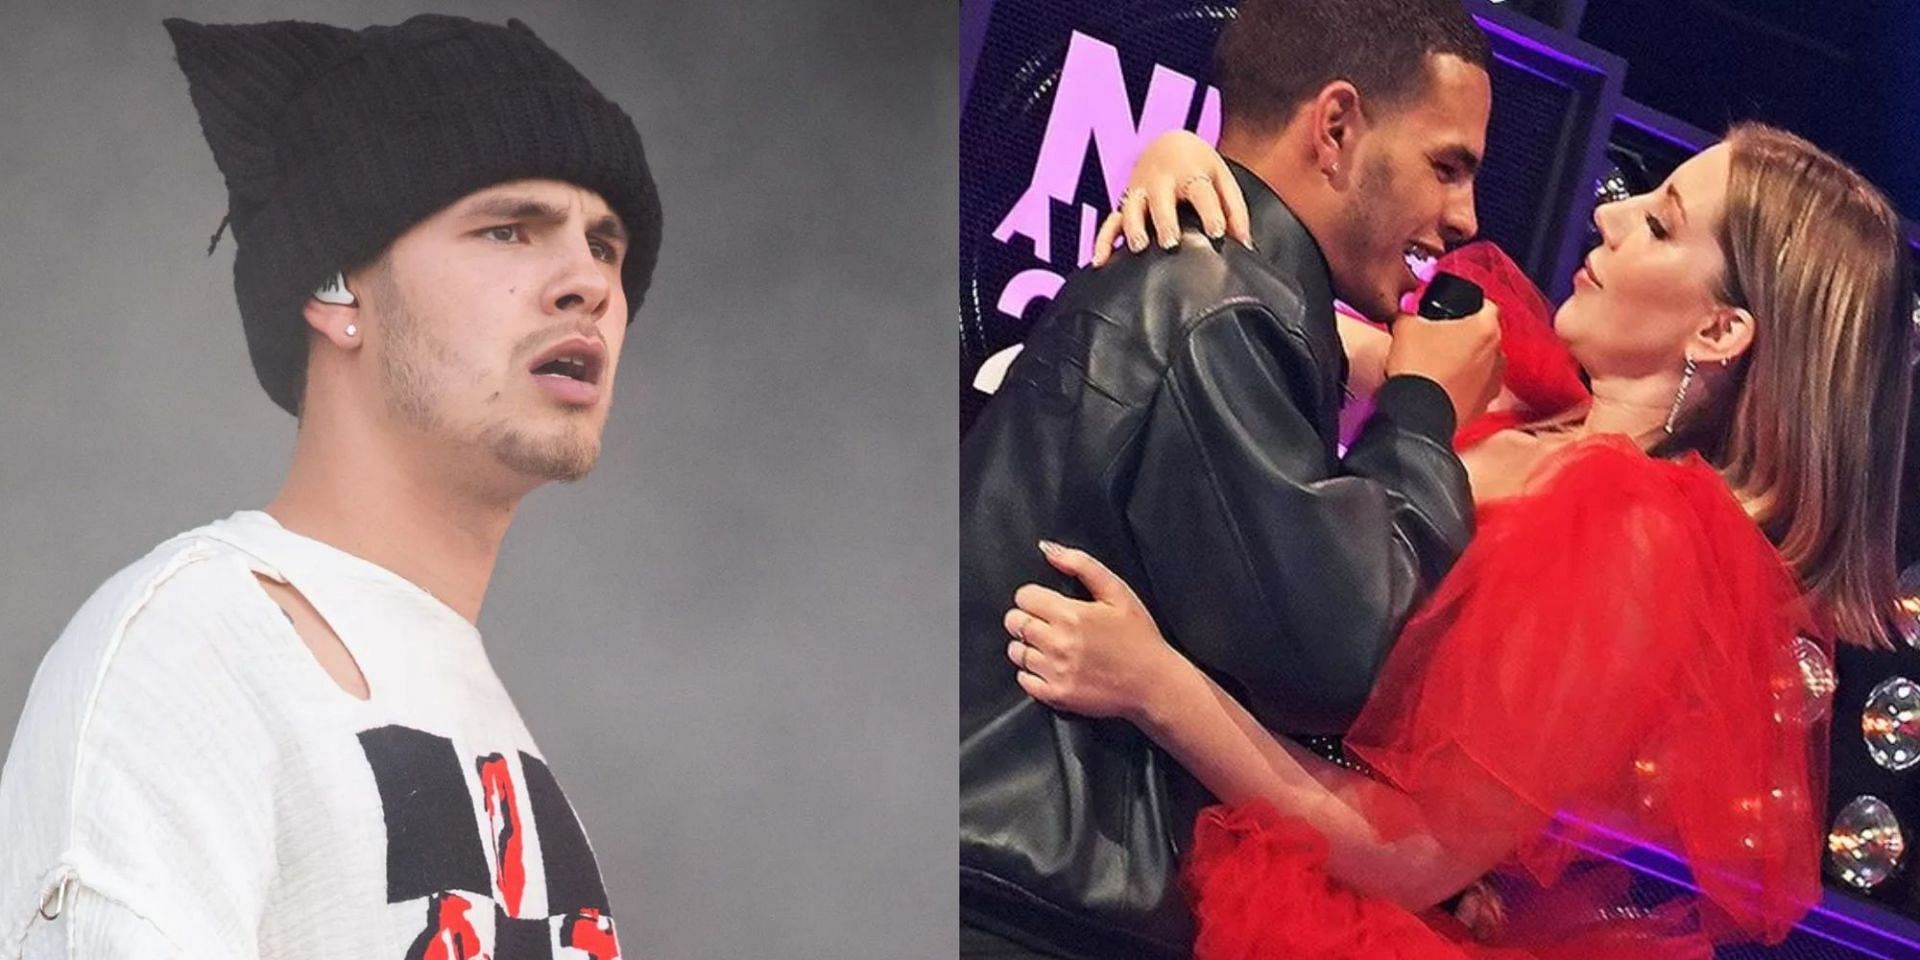 Slowthai and Katherine Ryan NME Awards video resurfaces amid latest allegations